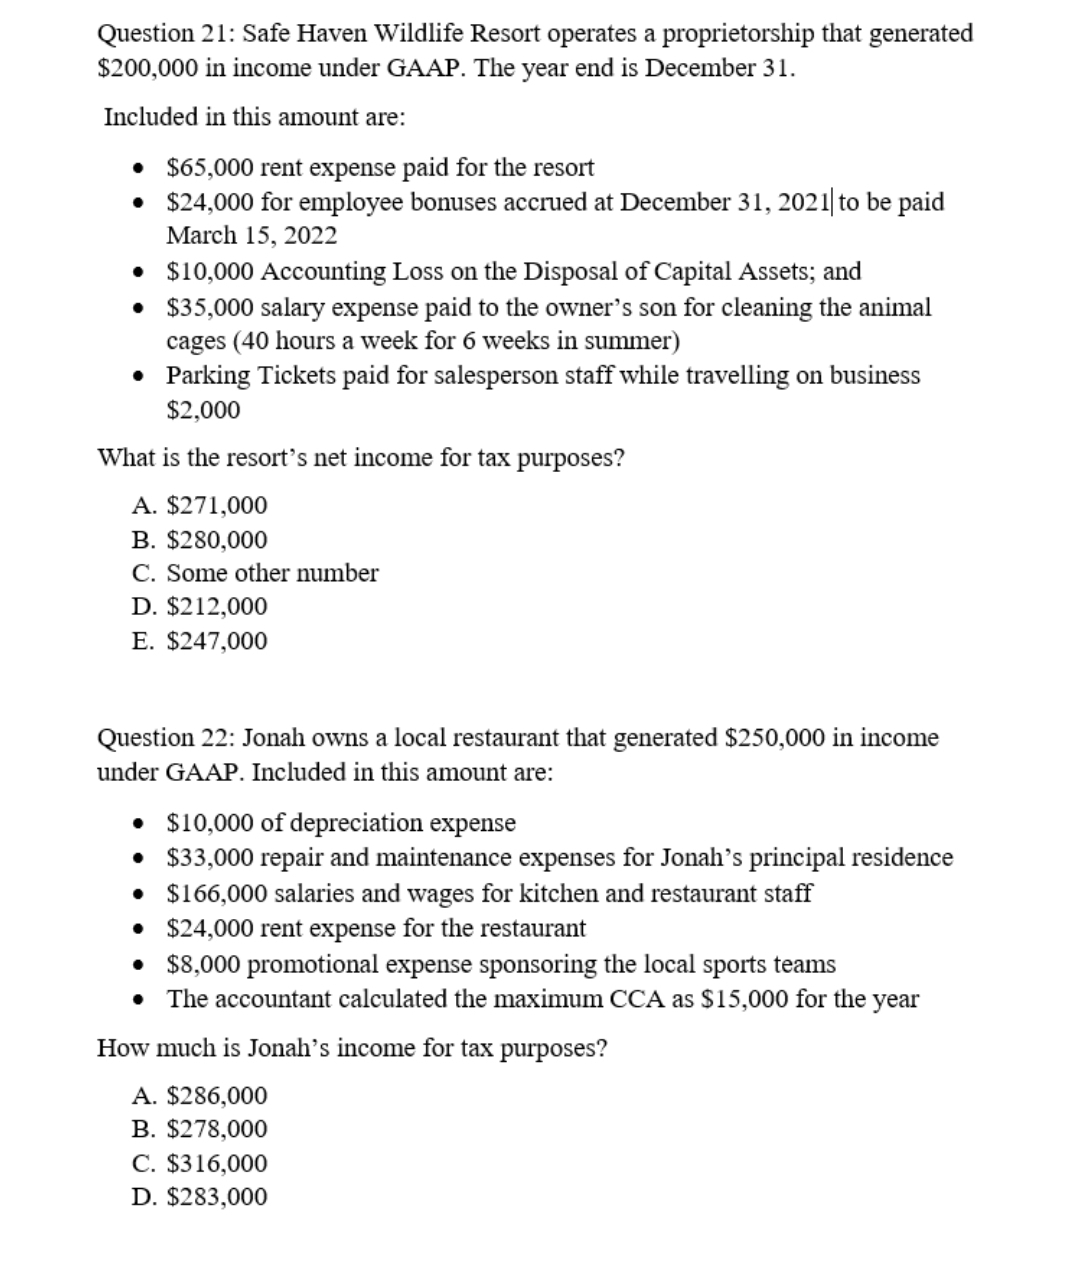 Question 21: Safe Haven Wildlife Resort operates a proprietorship that generated
$200,000 in income under GAAP. The year end is December 31.
Included in this amount are:
• $65,000 rent expense paid for the resort
• $24,000 for employee bonuses accrued at December 31, 2021| to be paid
March 15, 2022
• $10,000 Accounting Loss on the Disposal of Capital Assets; and
• $35,000 salary expense paid to the owner's son for cleaning the animal
cages (40 hours a week for 6 weeks in summer)
• Parking Tickets paid for salesperson staff while travelling on business
$2,000
What is the resort's net income for tax purposes?
A. $271,000
B. $280,000
C. Some other number
D. $212,000
E. $247,000
Question 22: Jonah owns a local restaurant that generated $250,000 in income
under GAAP. Included in this amount are:
• $10,000 of depreciation expense
• $33,000 repair and maintenance expenses for Jonah's principal residence
• $166,000 salaries and wages for kitchen and restaurant staff
$24,000 rent expense for the restaurant
• $8,000 promotional expense sponsoring the local sports teams
• The accountant calculated the maximum CCA as $15,000 for the year
How much is Jonah's income for tax purposes?
A. $286,000
B. $278,000
C. $316,000
D. $283,000
